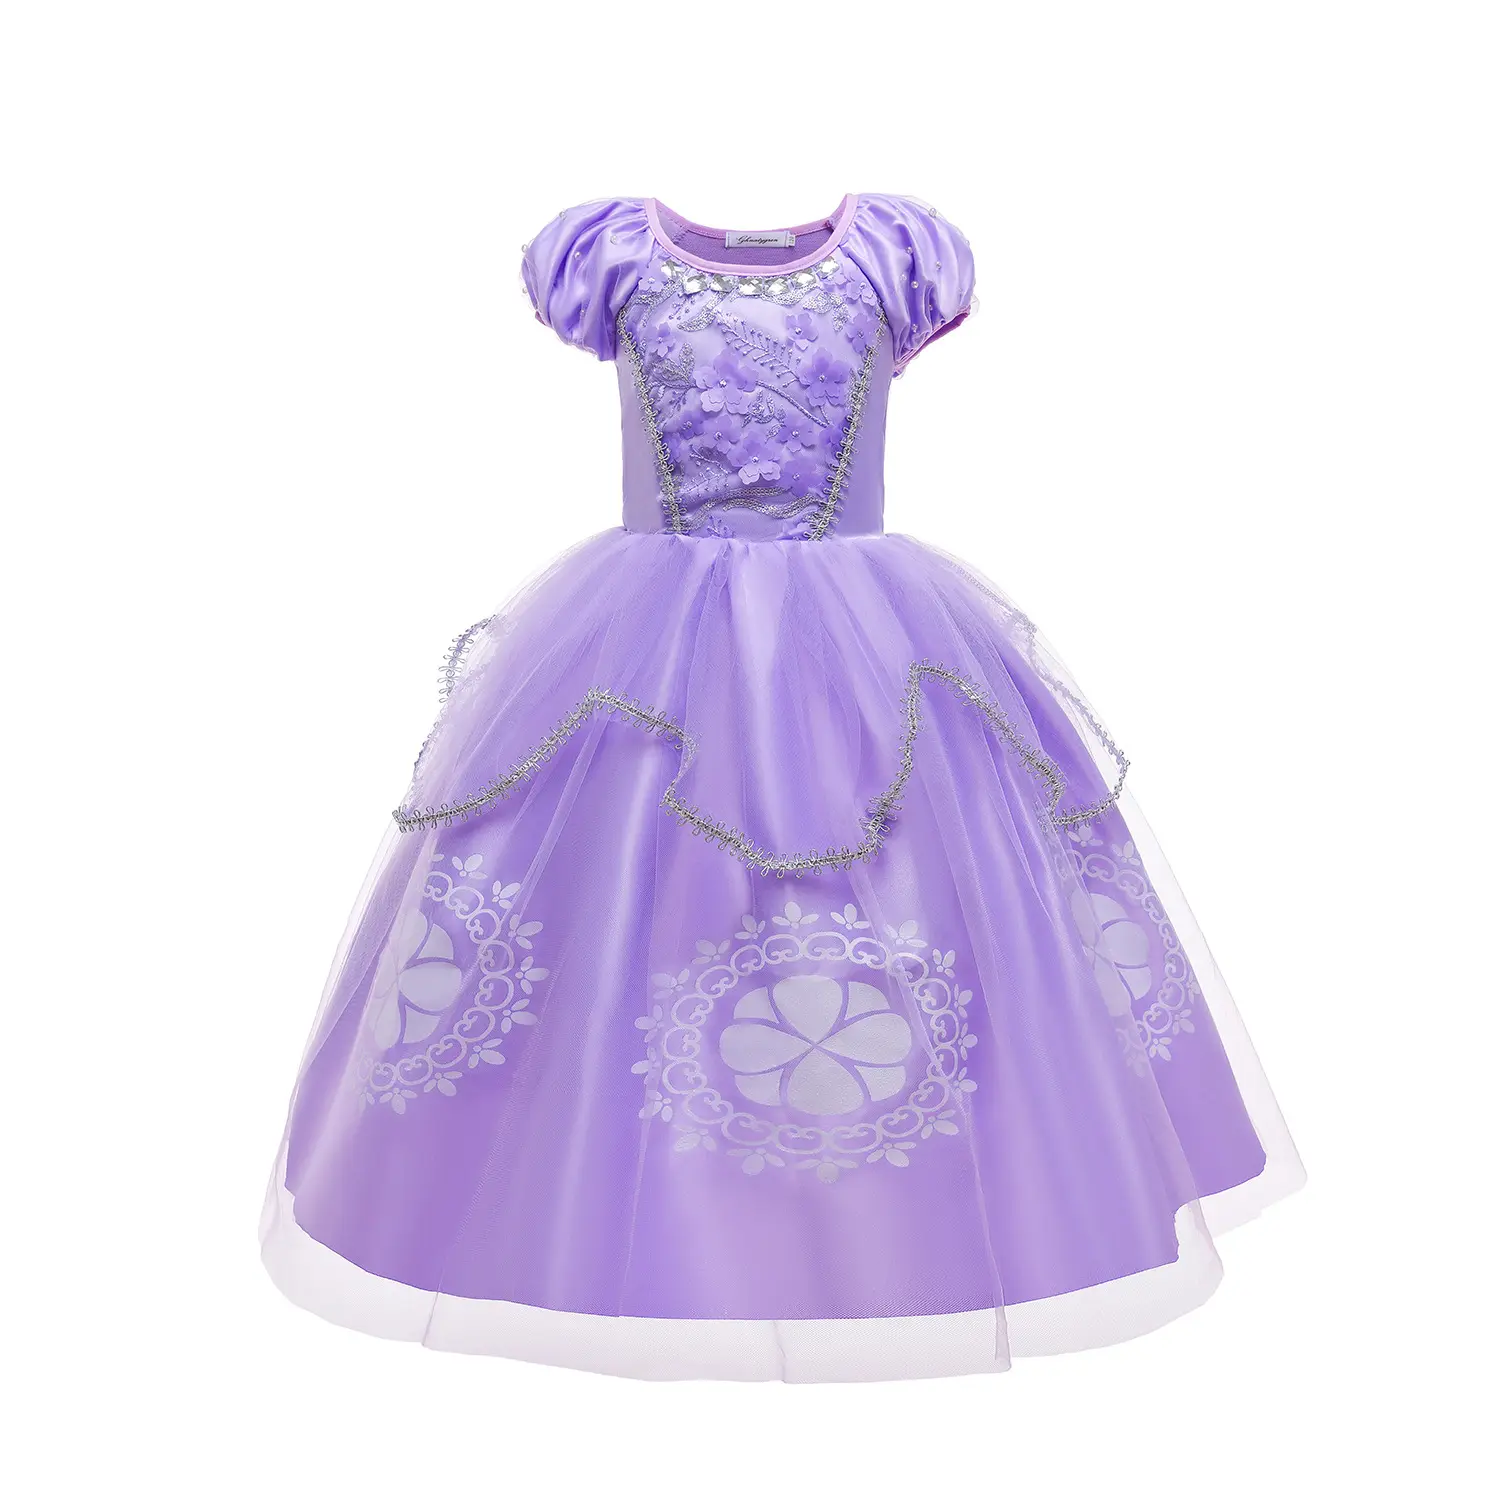 E15 Baby girl Ruffle outfit Christmas Party Design Girls Fancy Cosplay Little Princess Sofia Dress